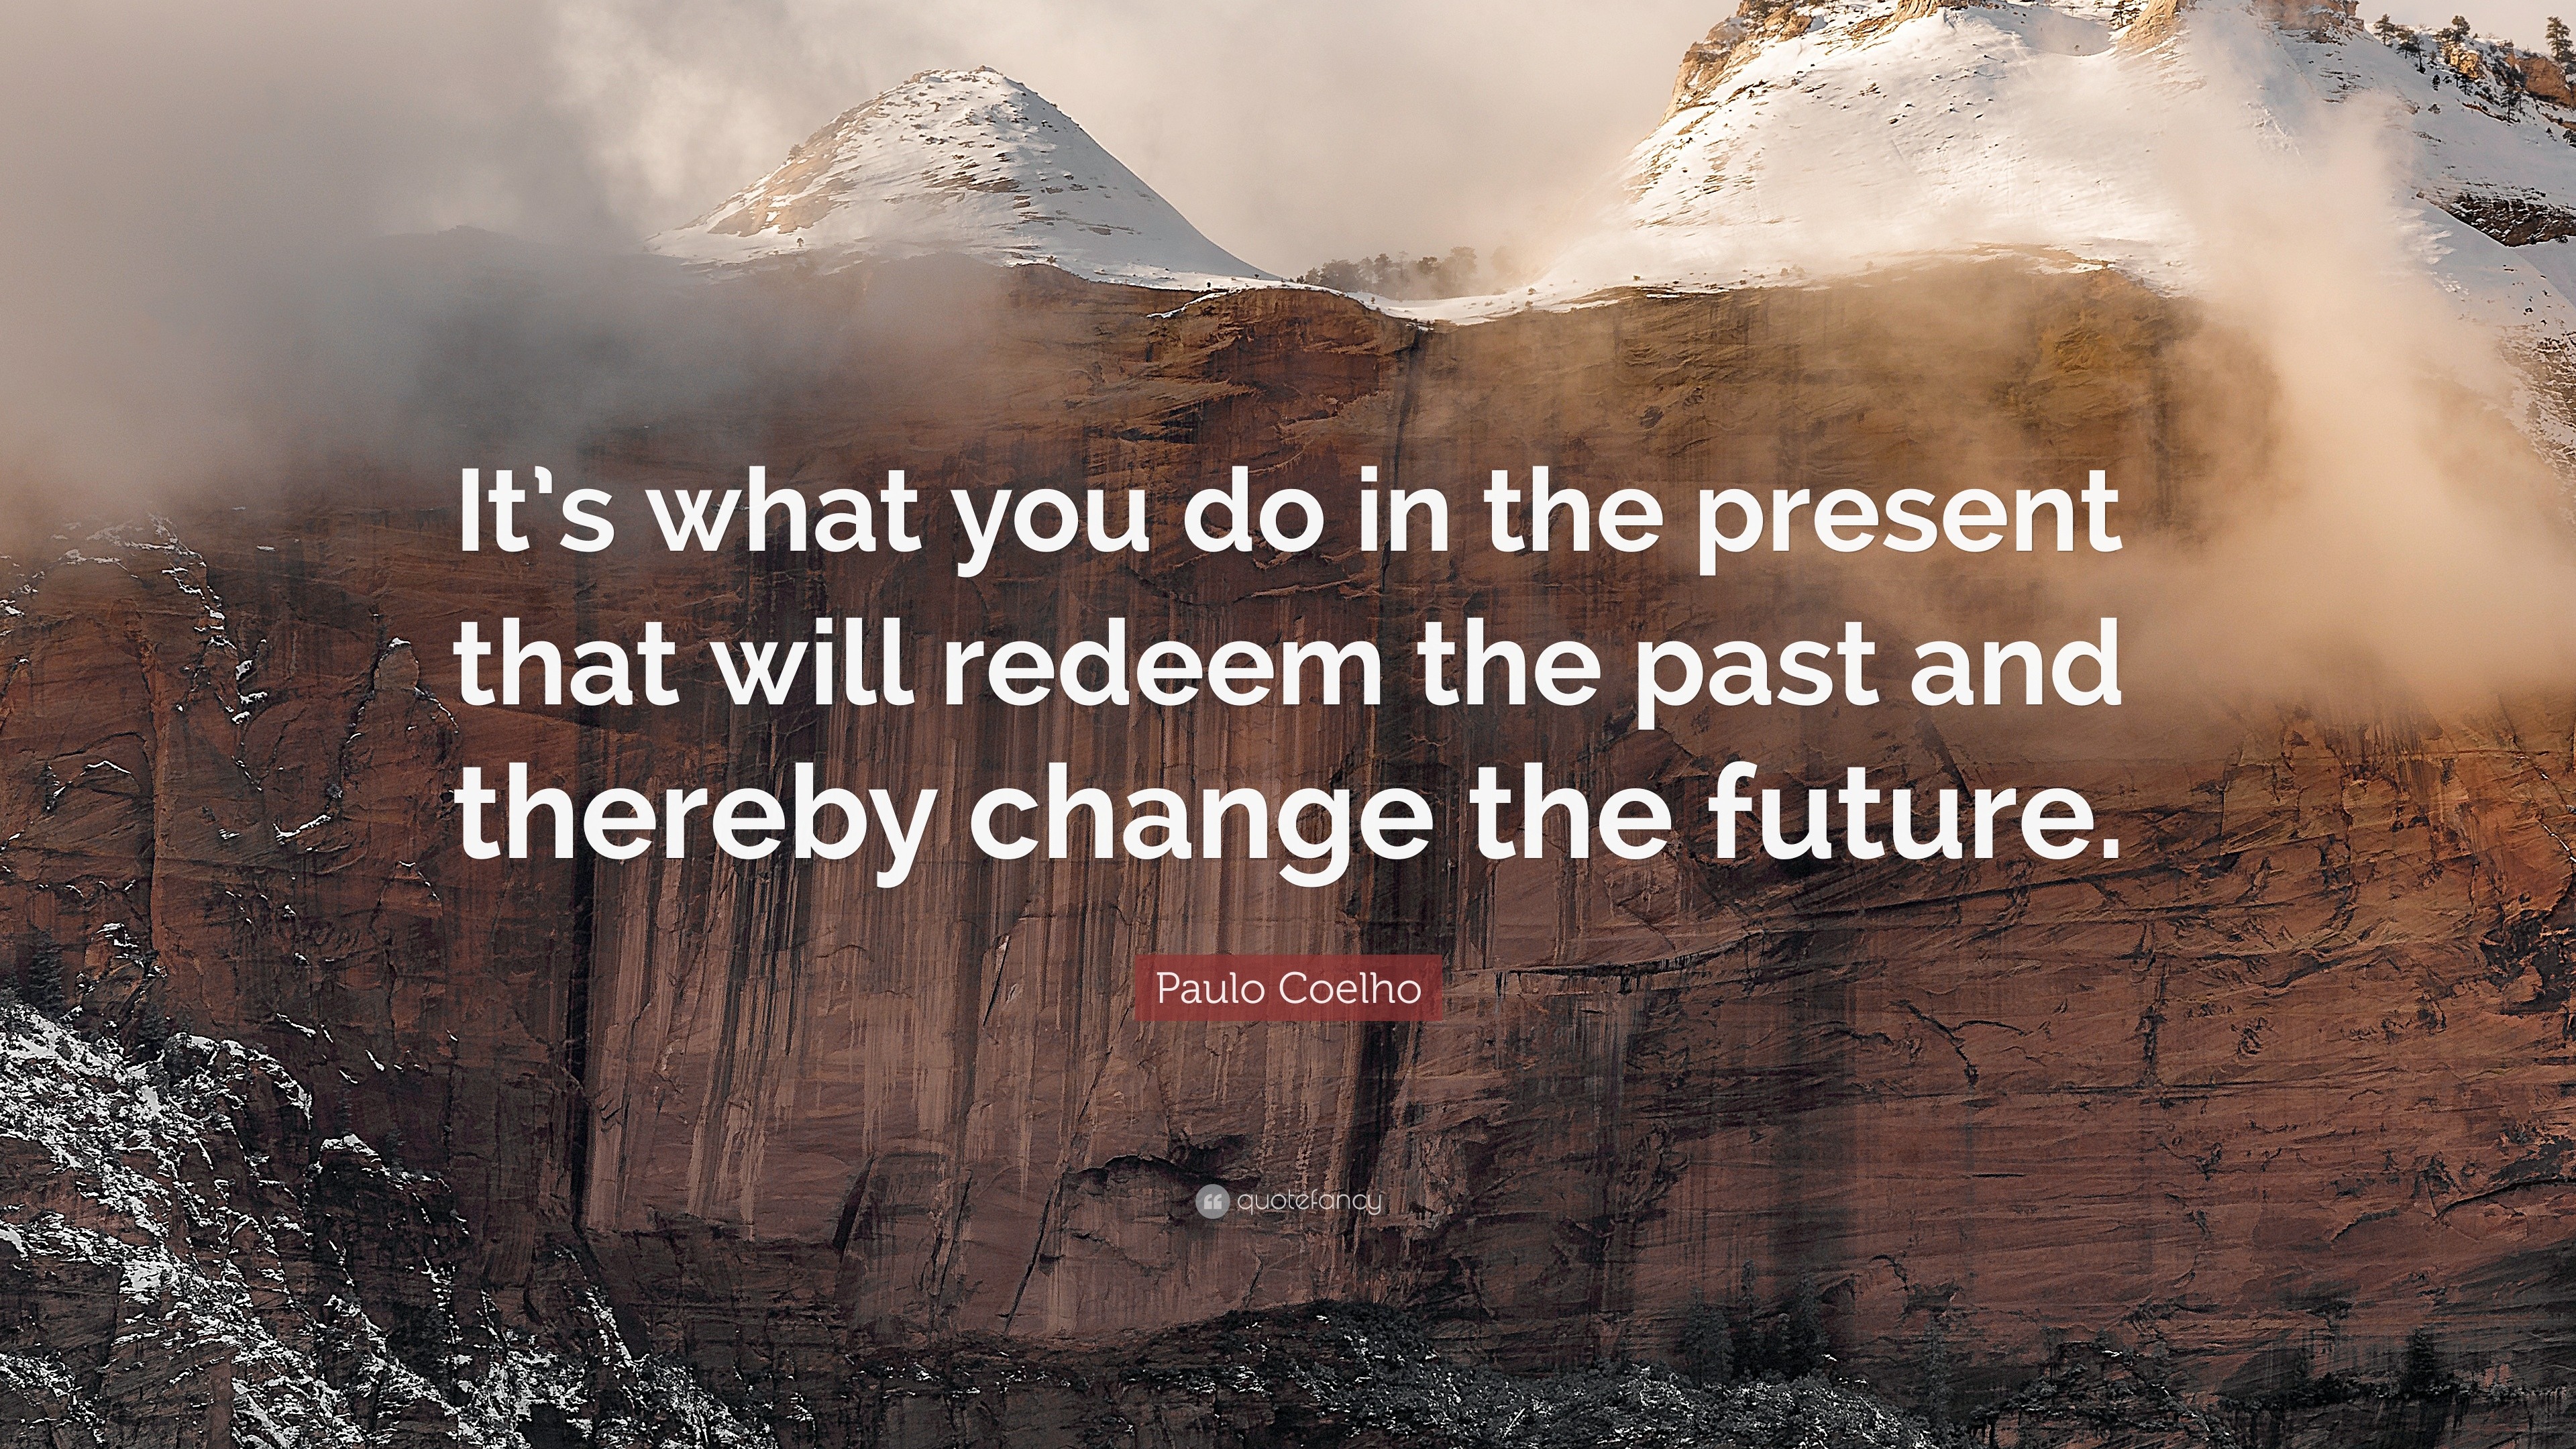 1705973 Paulo Coelho Quote It s what you do in the present that will